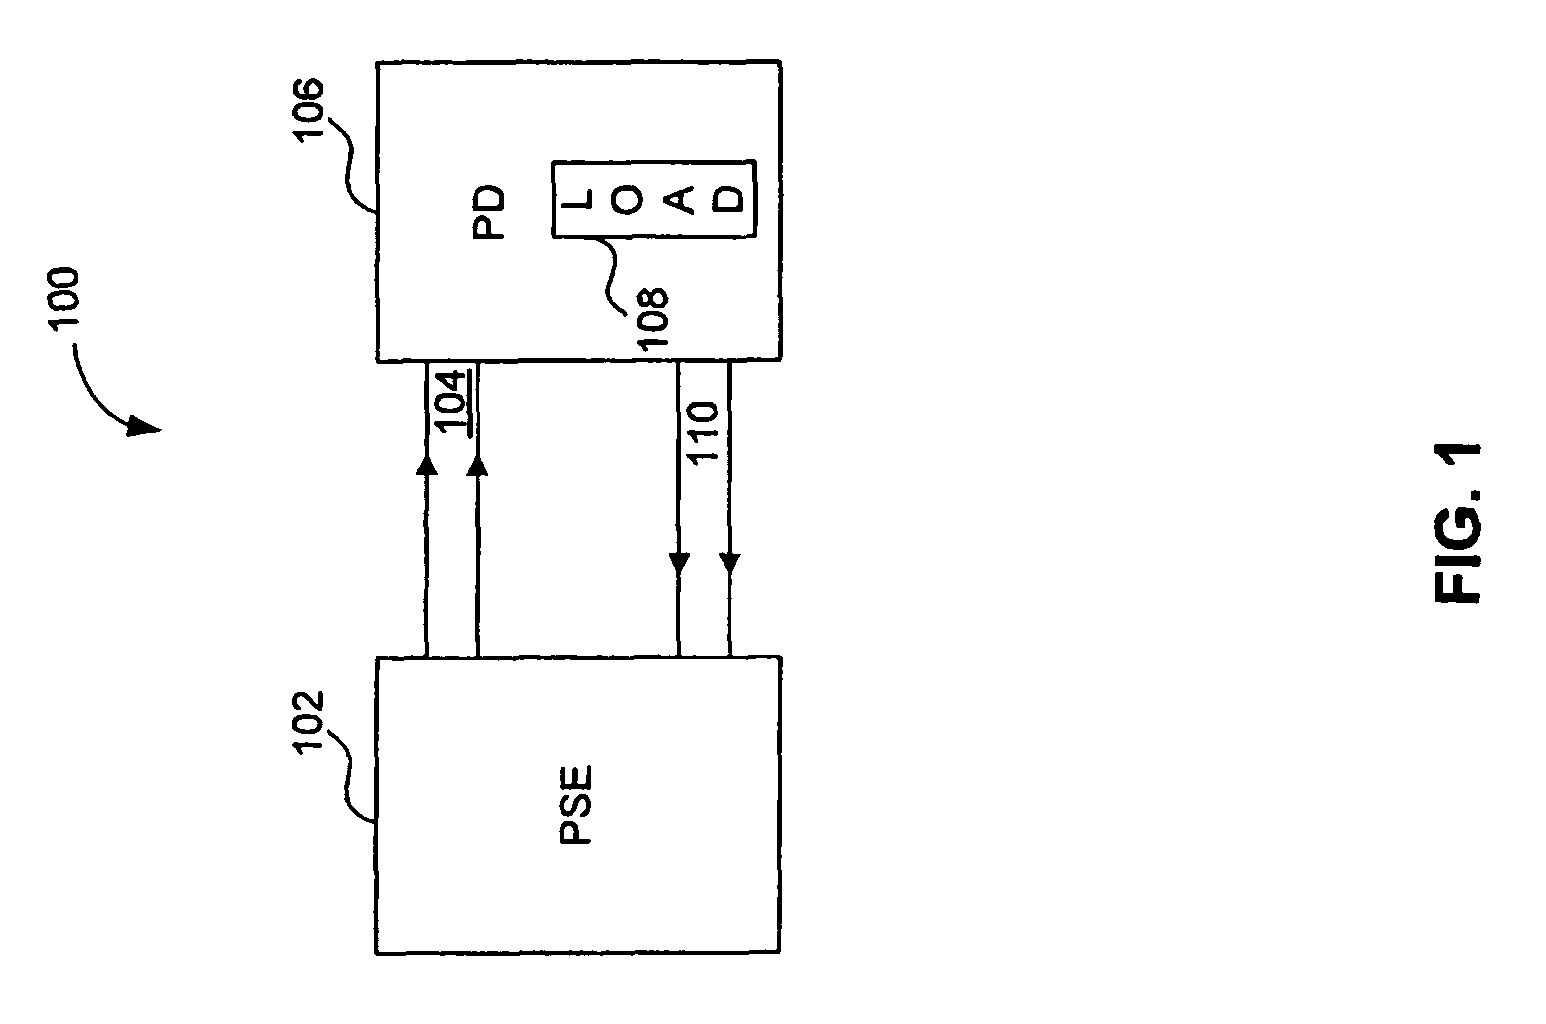 Power over ethernet connector with integrated power source equipment (PSE) controller supporting high power applications